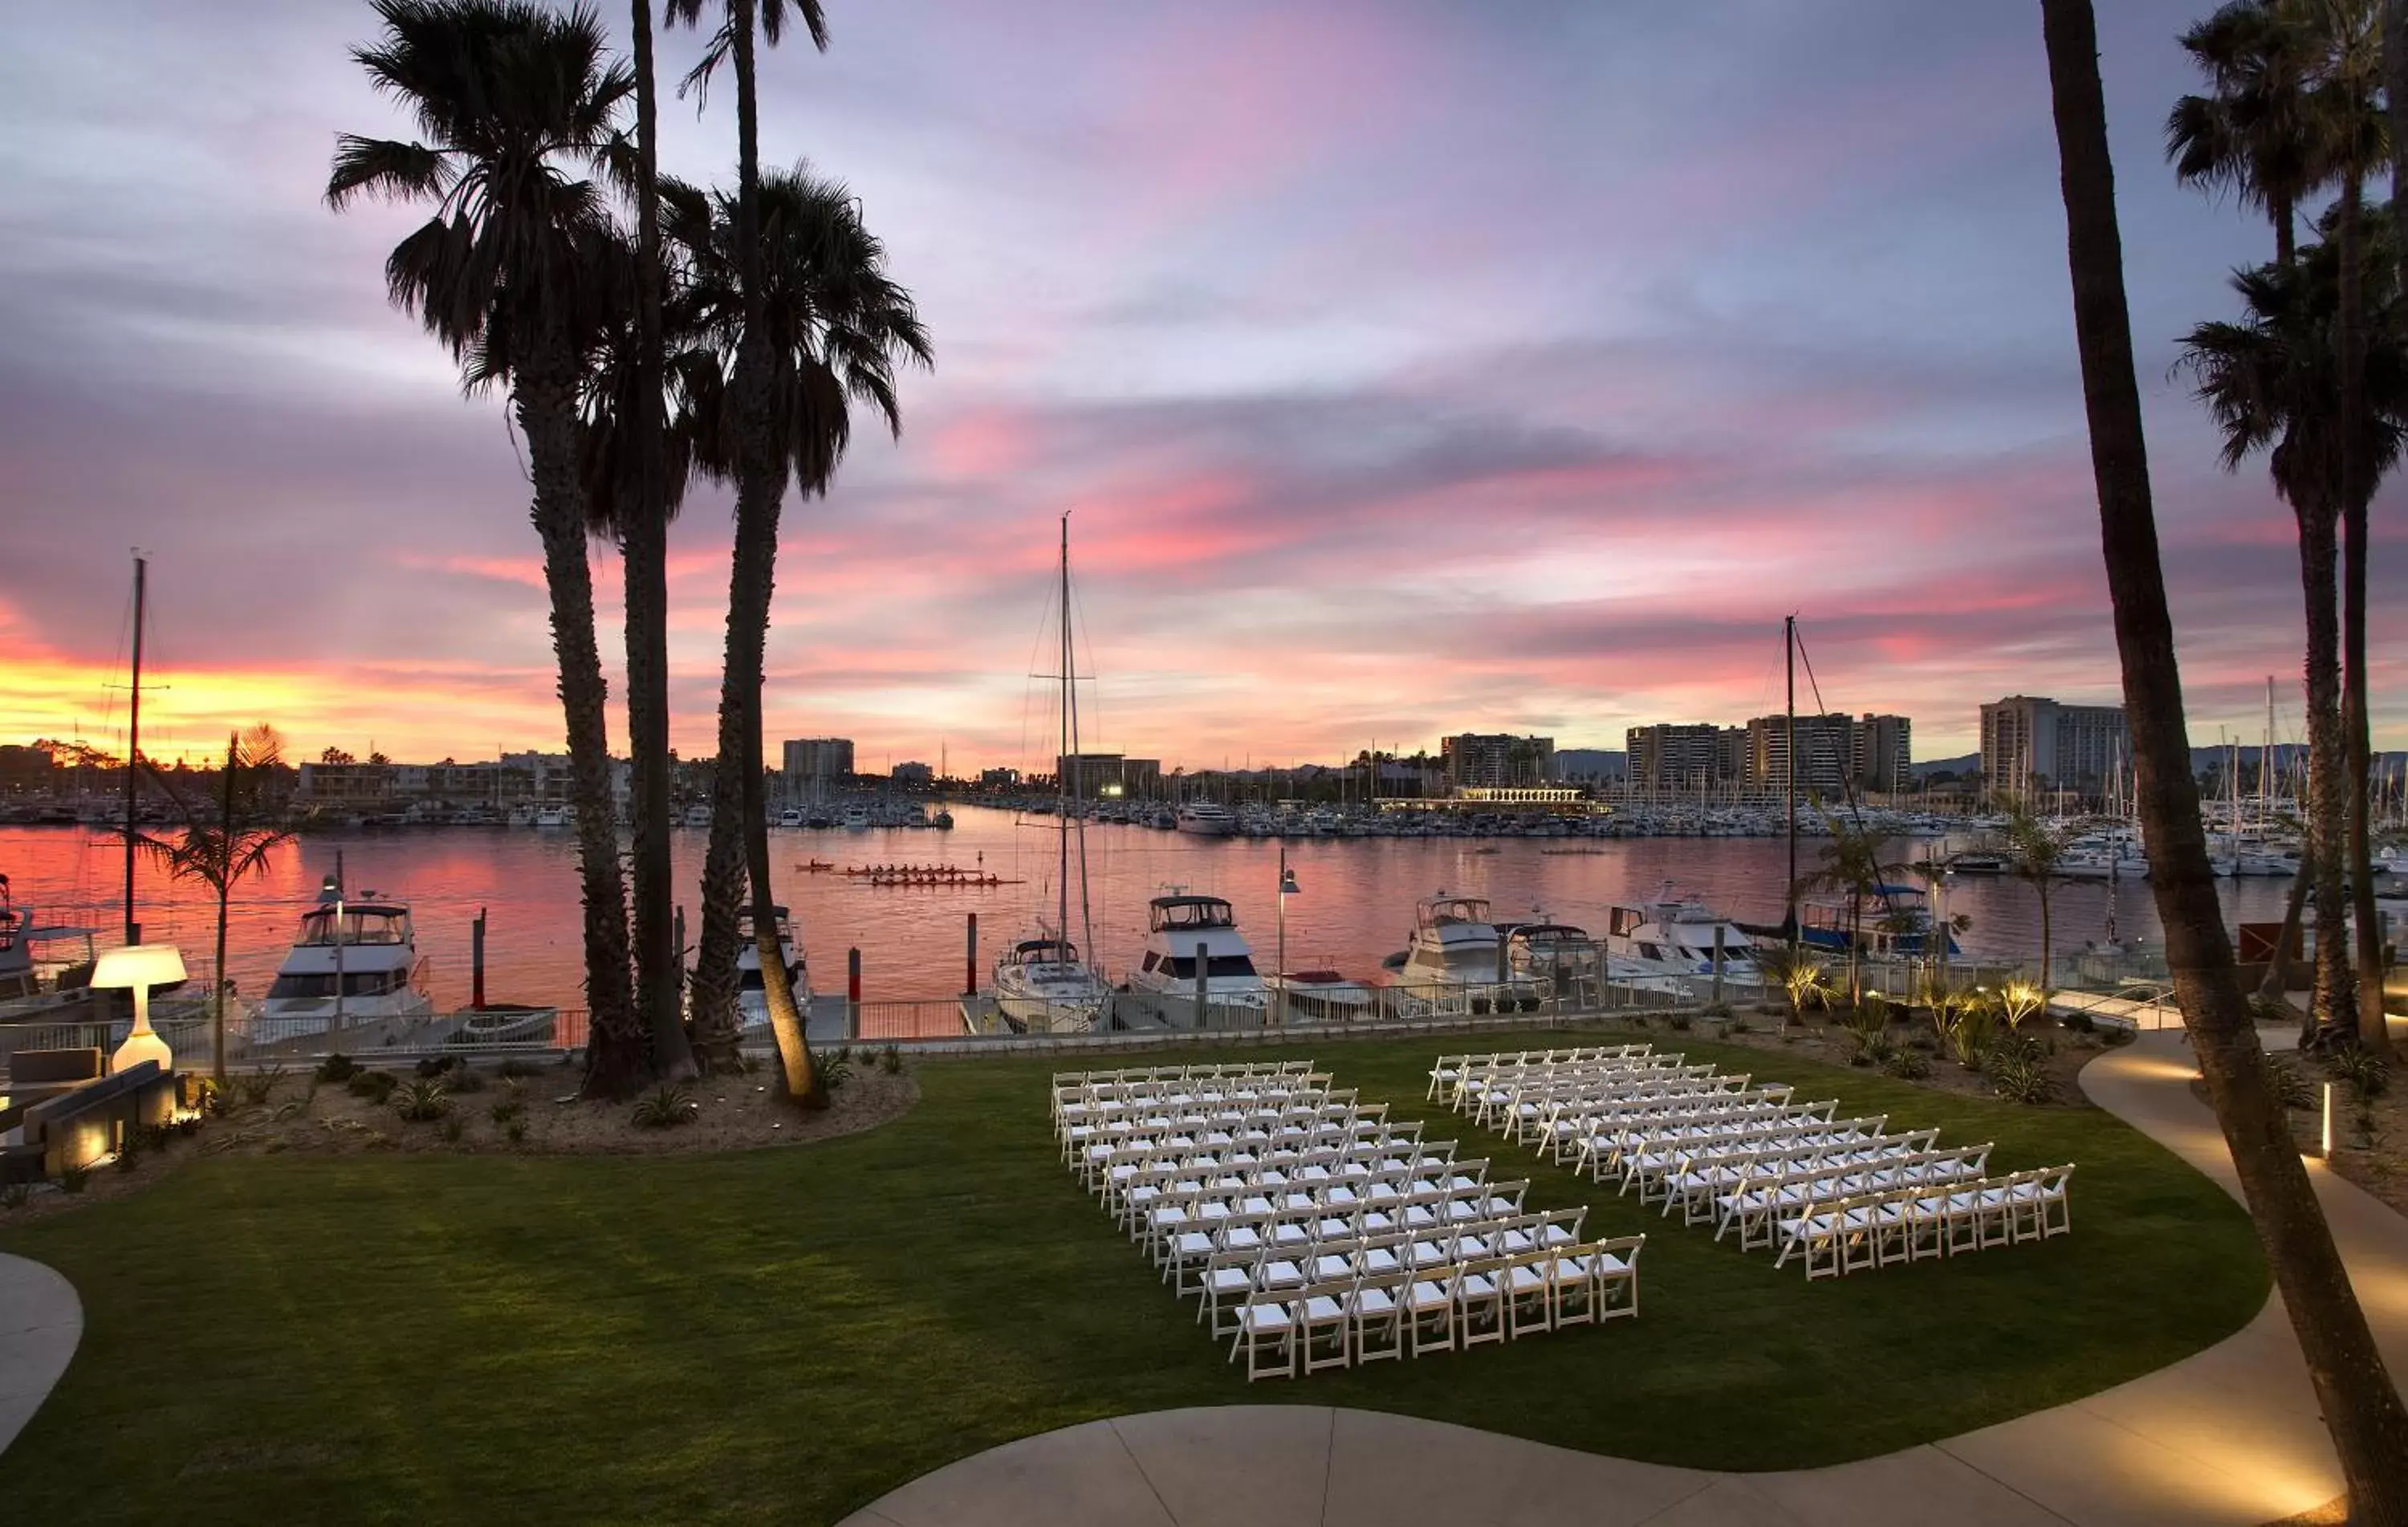 Banquet/Function facilities, Sunrise/Sunset in Marina del Rey Hotel